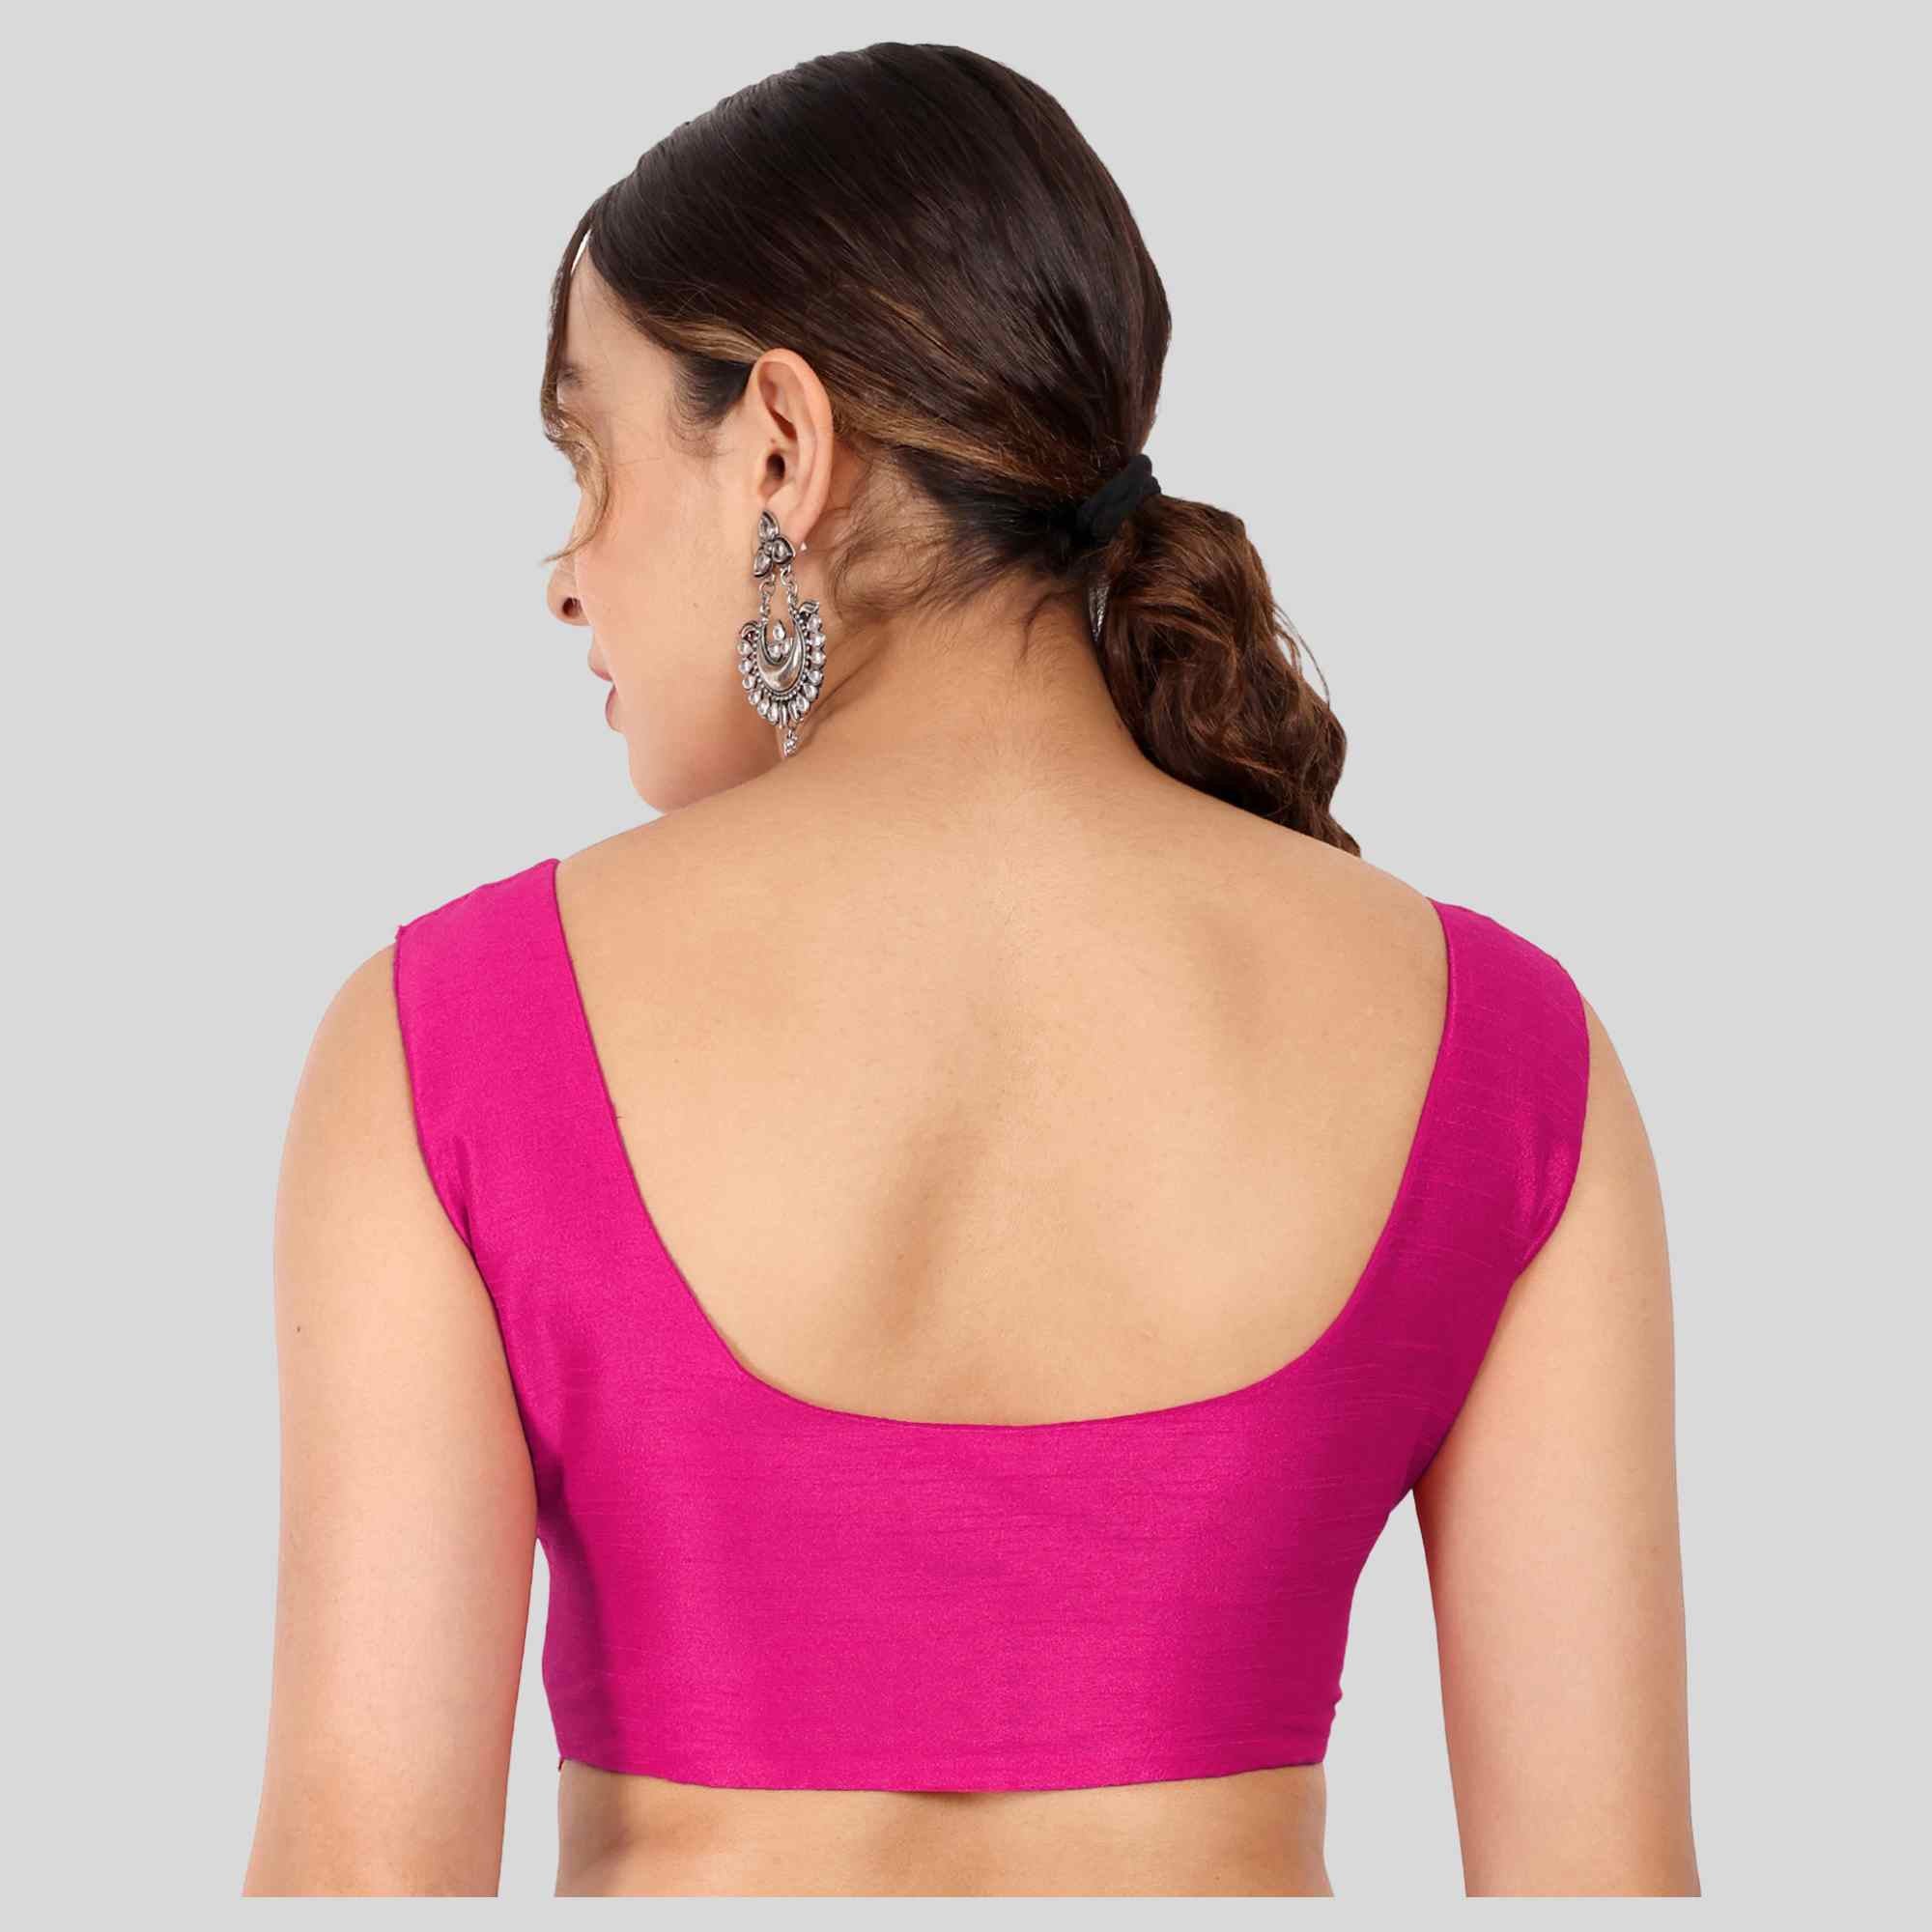 Sleeveless blouse online in color pink available in chennai